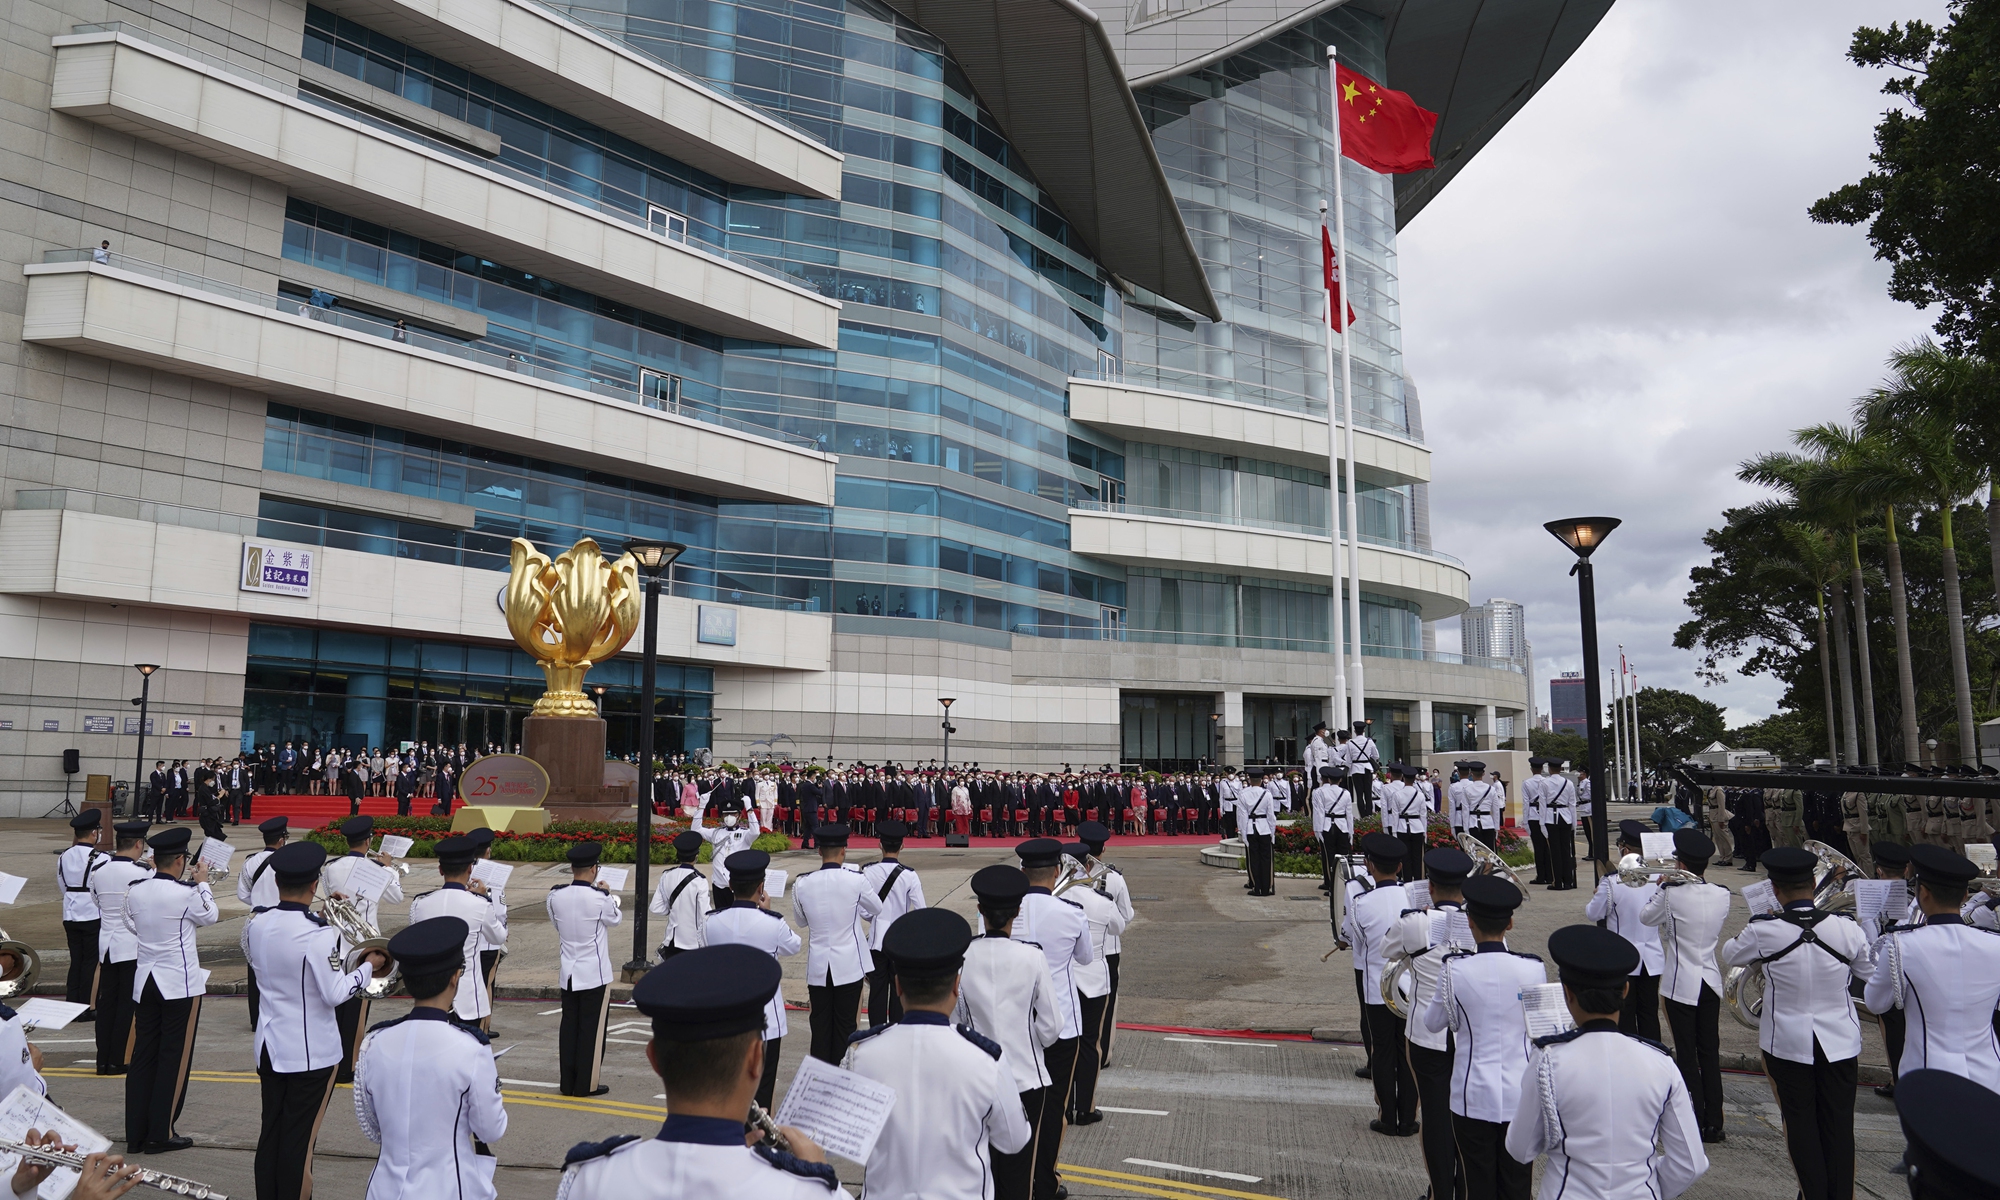 A flag raising ceremony is held at the Golden Bauhinia Square in Hong Kong Special Administrative Region on July 1, 2022 to mark the 25th anniversary of the city's return to the motherland. Photo: VCG